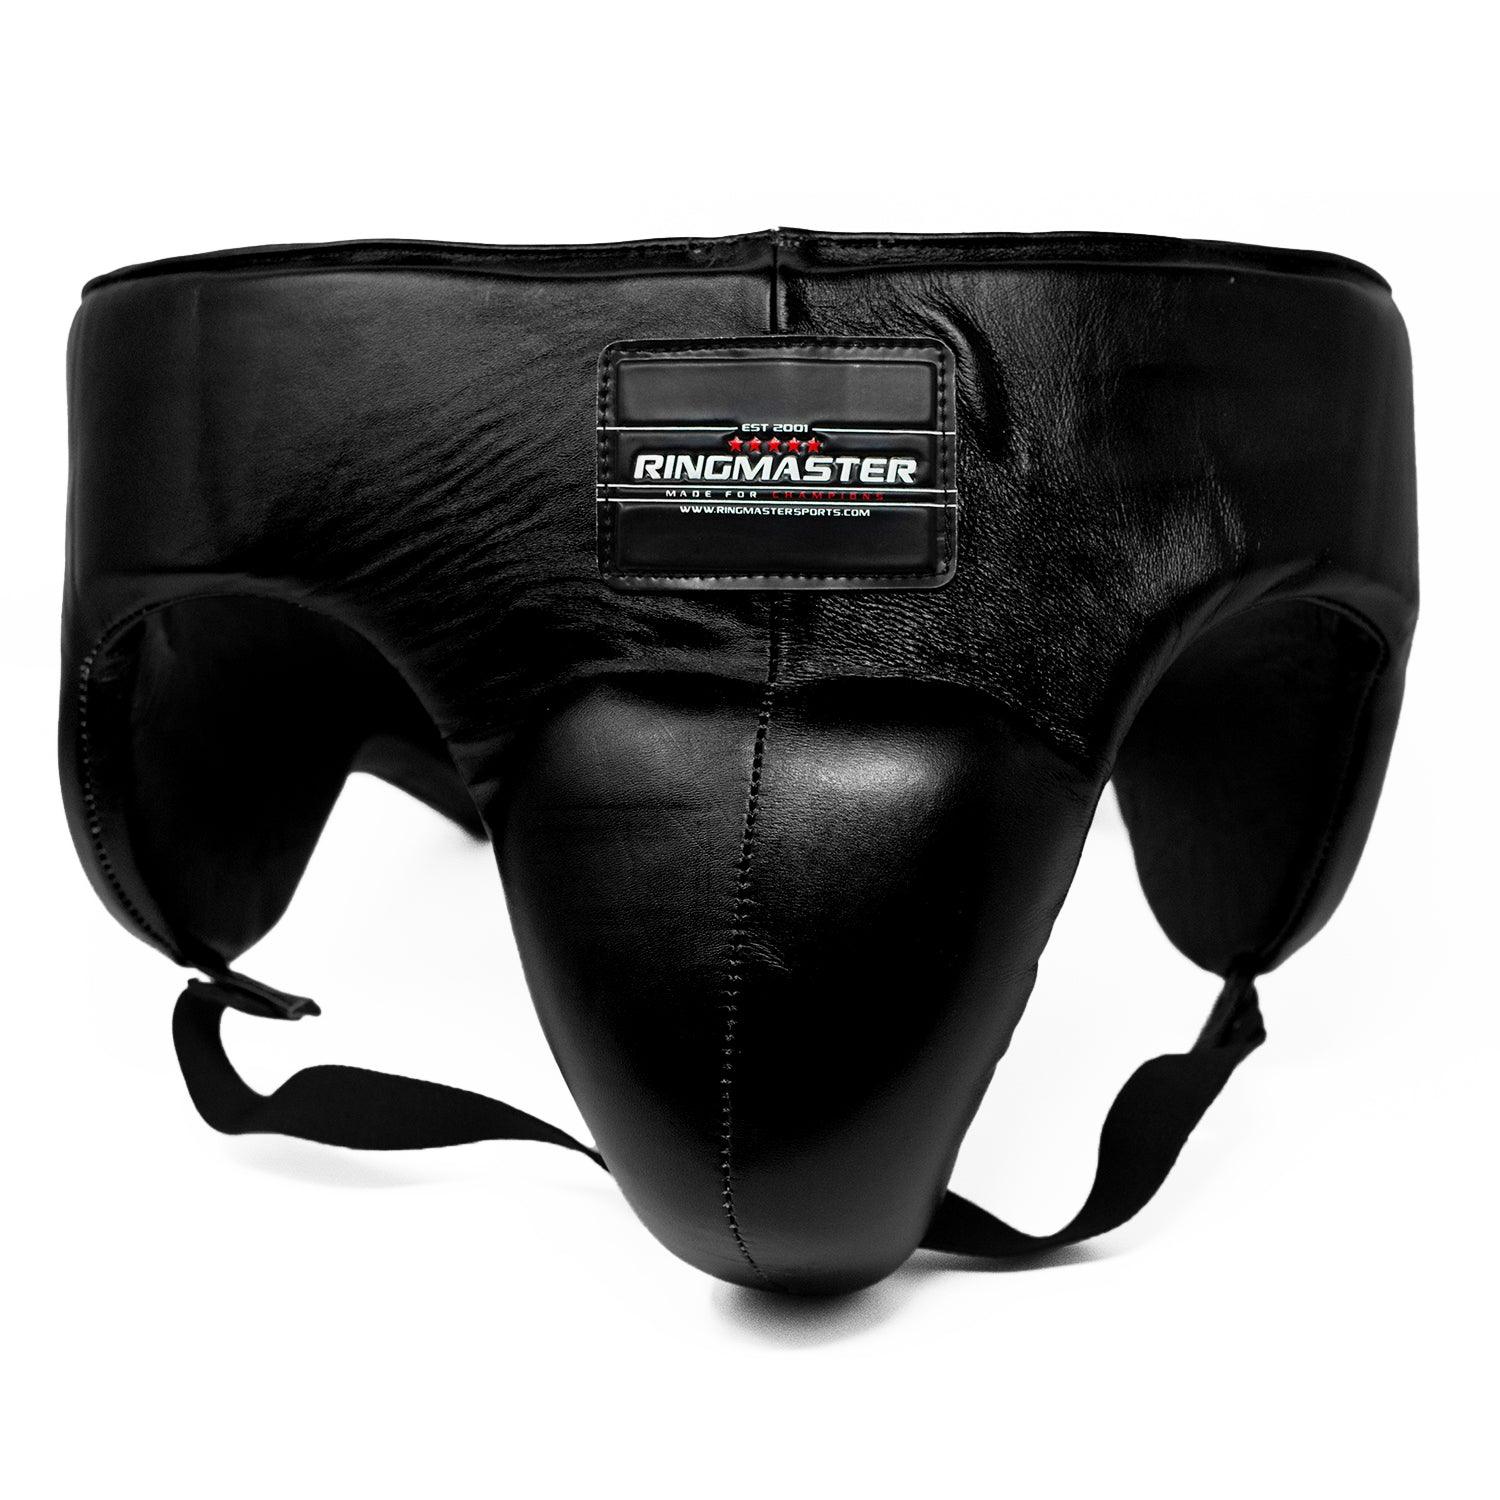 RingMaster Sports Pro 3.0 Groin Guard Genuine Leather Black - RINGMASTER SPORTS - Made For Champions